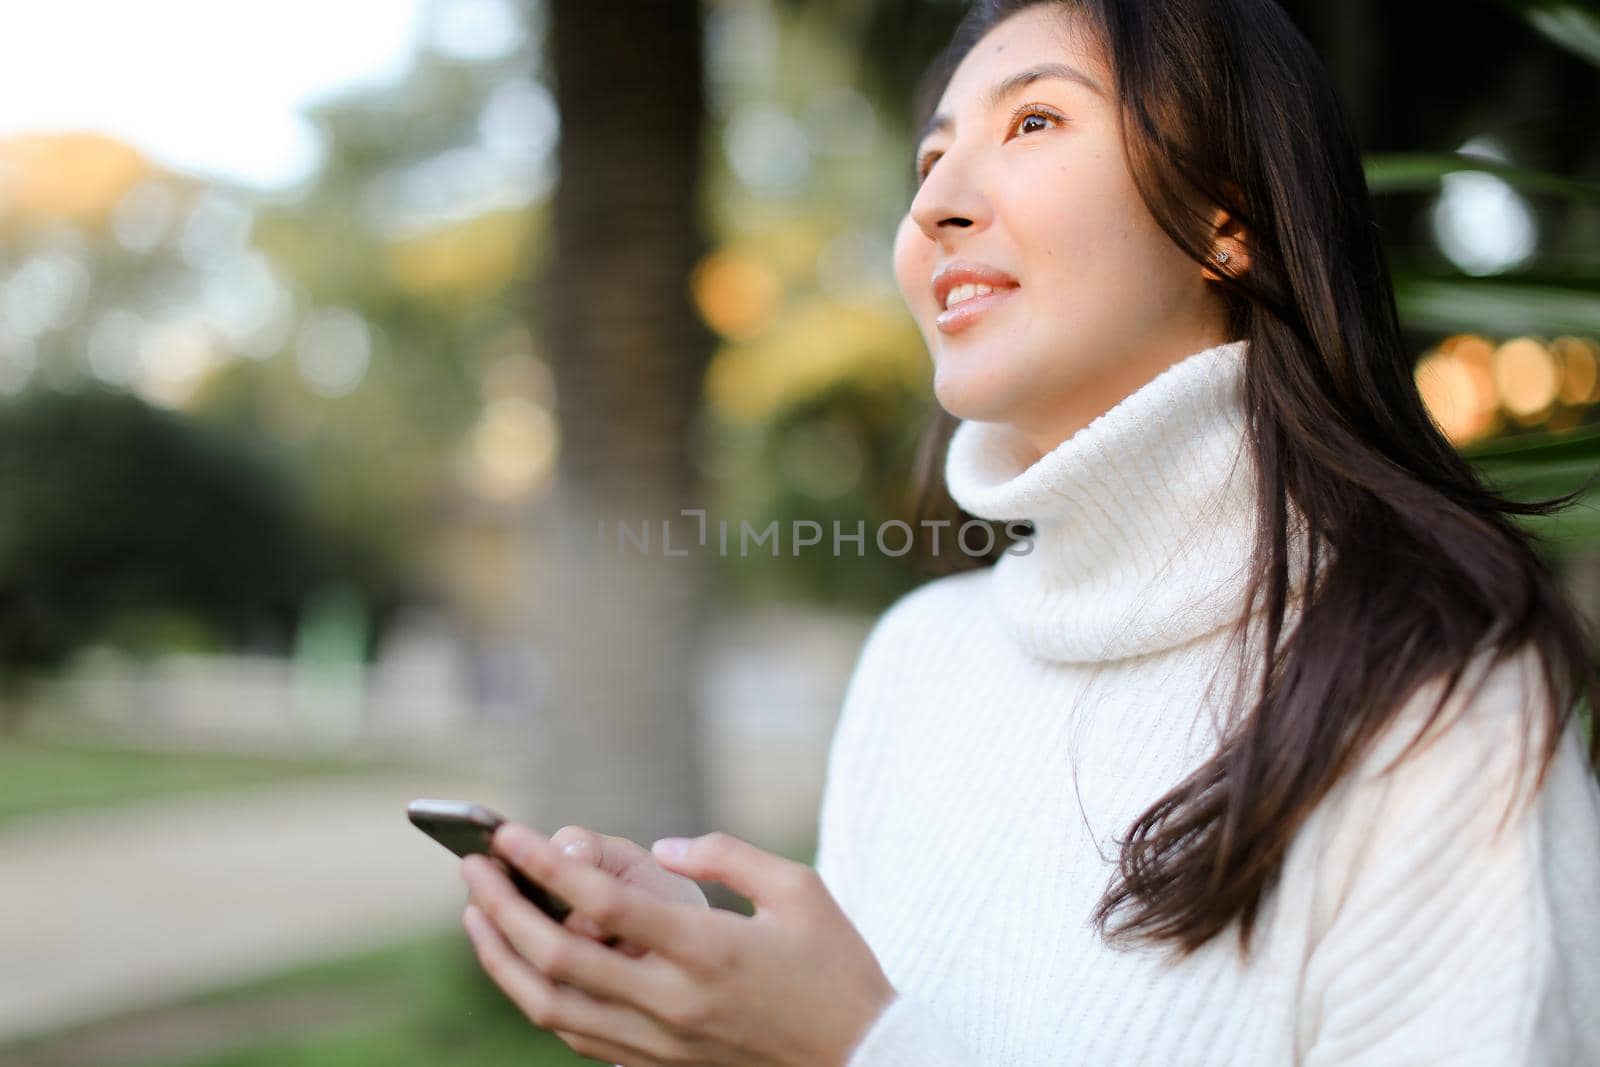 Chinese cute girl using smartphone and walking in tropical park. Concept of modern technology and nature.